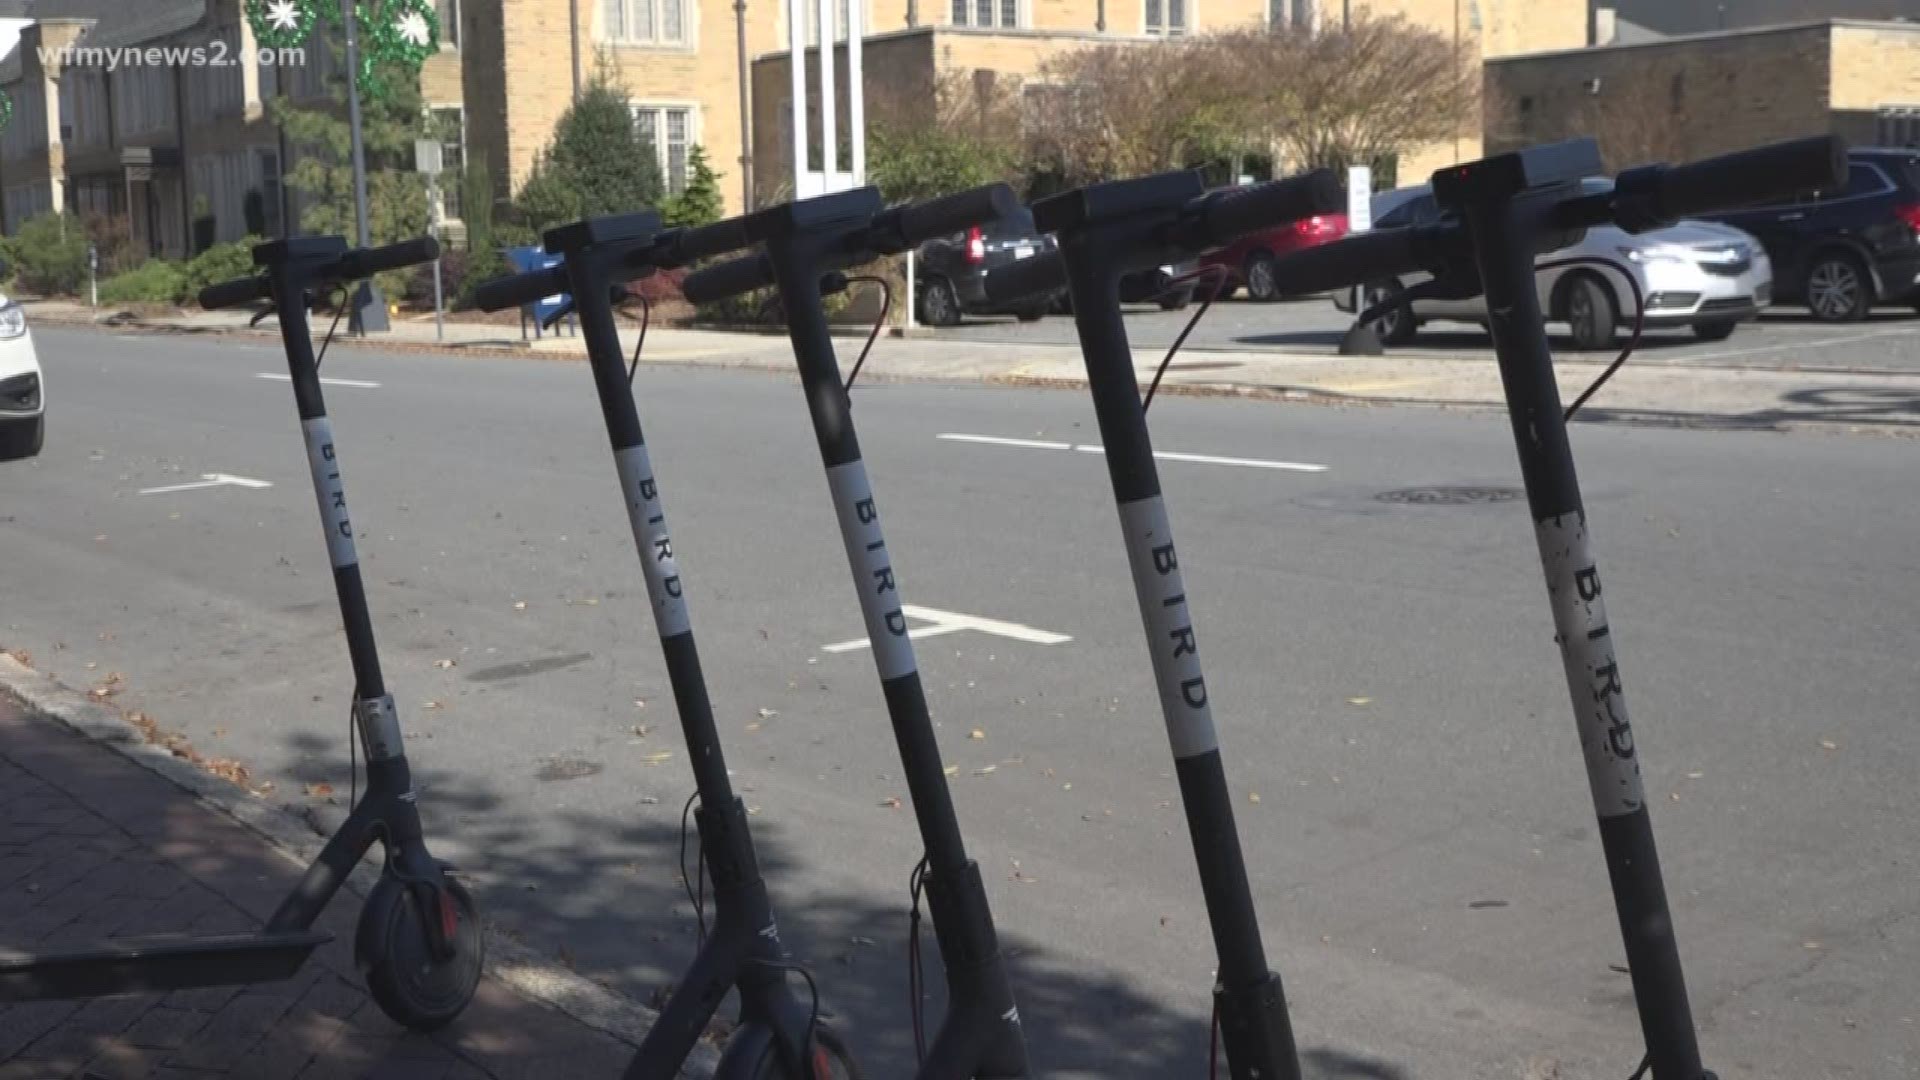 Bird Scooters are no longer allowed in Winston-Salem. Last night, the city banned them after getting several complaints about their safety.